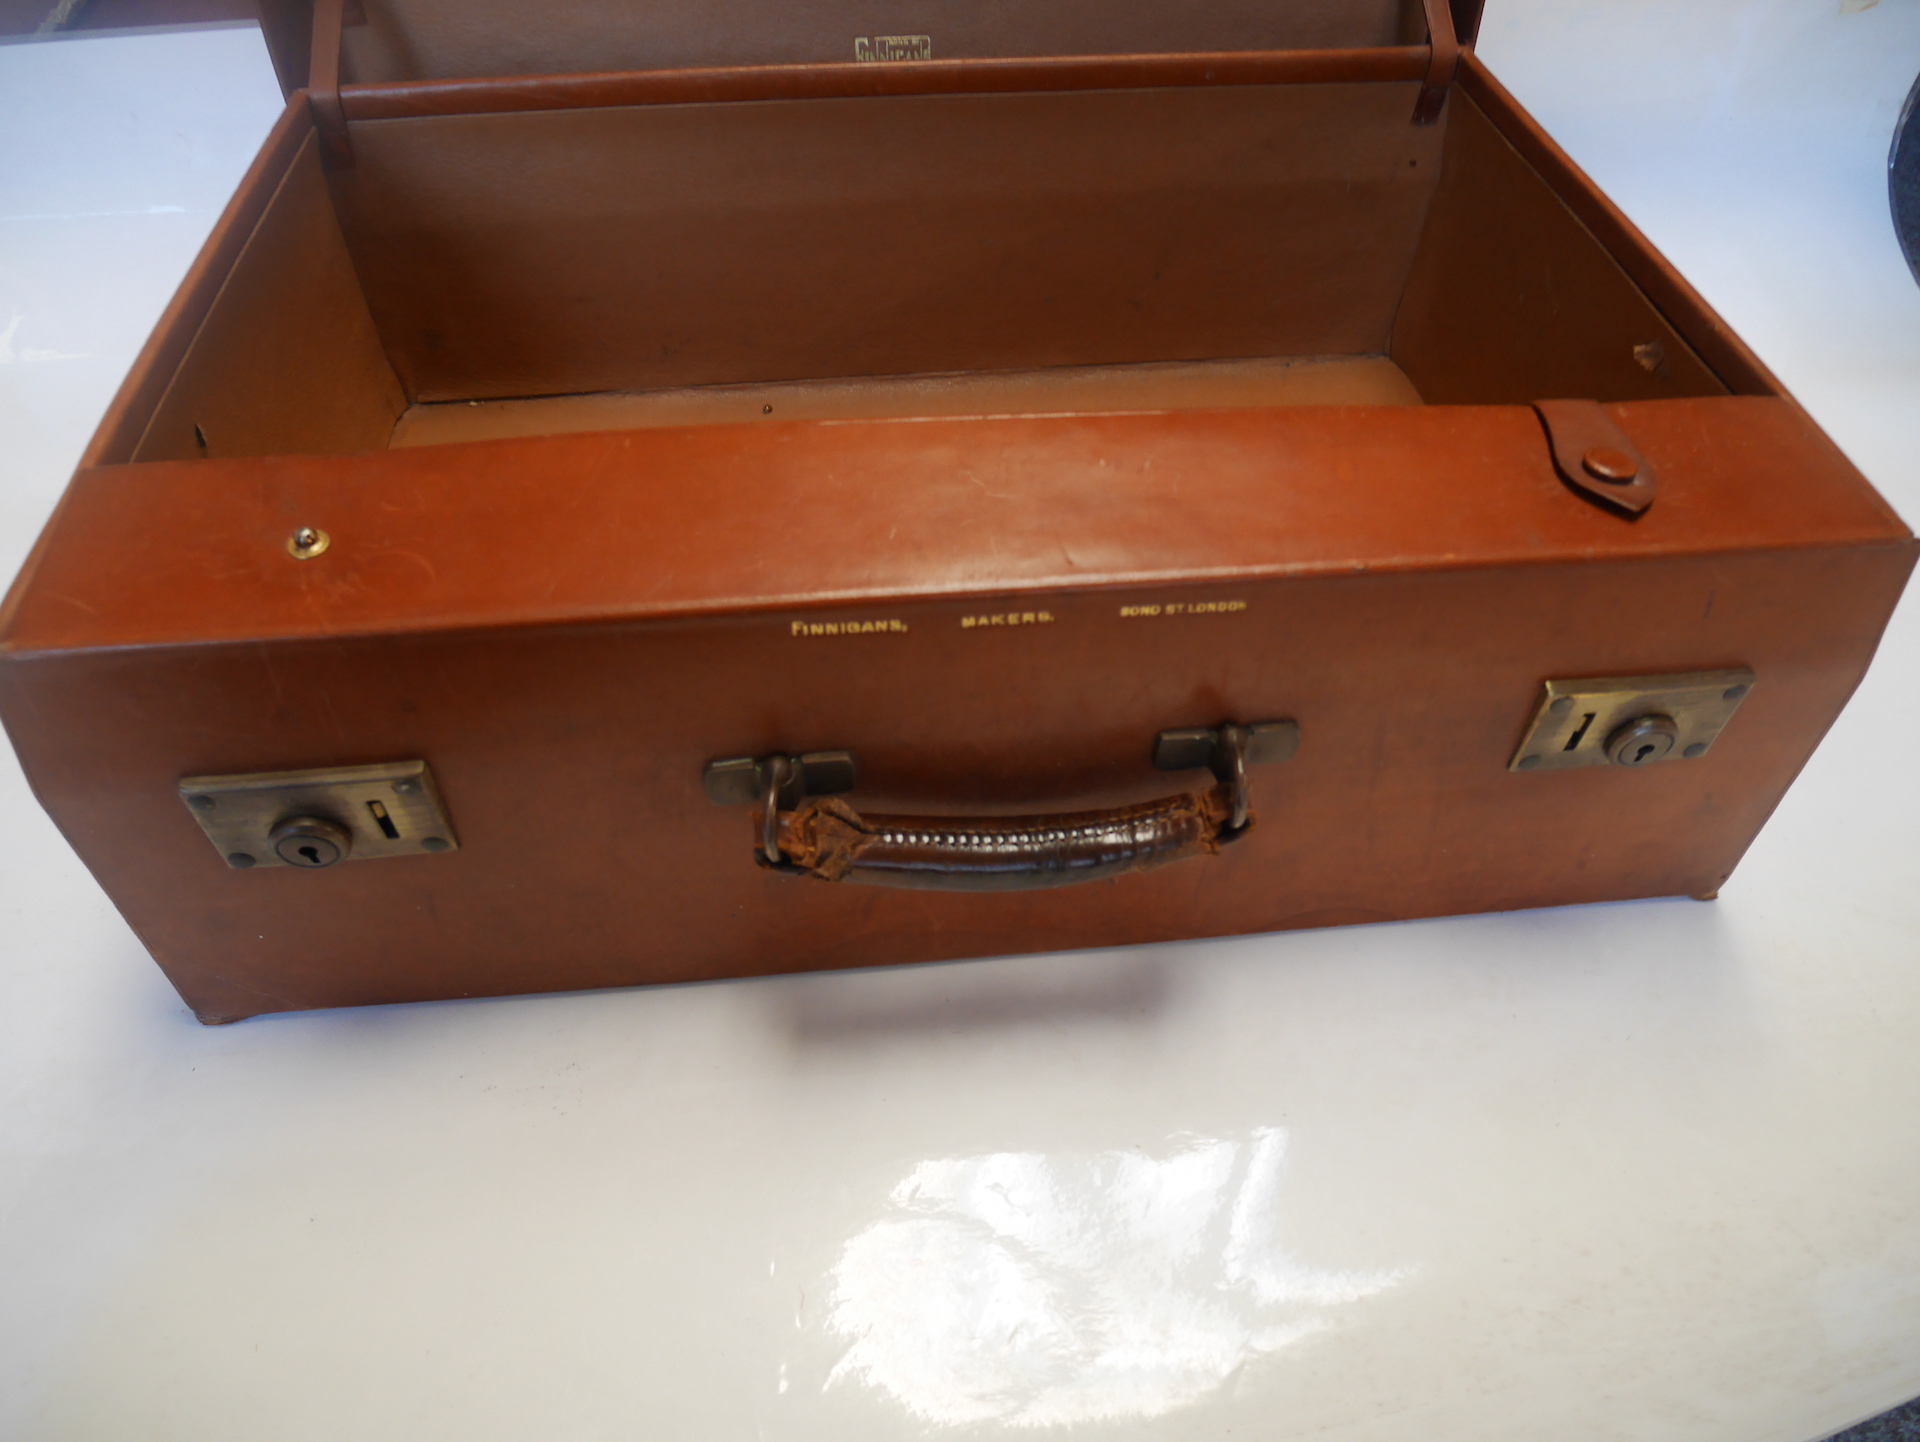 Leather suitcase by " Finnigans Bond Street London " with London silver bottles - Image 2 of 6